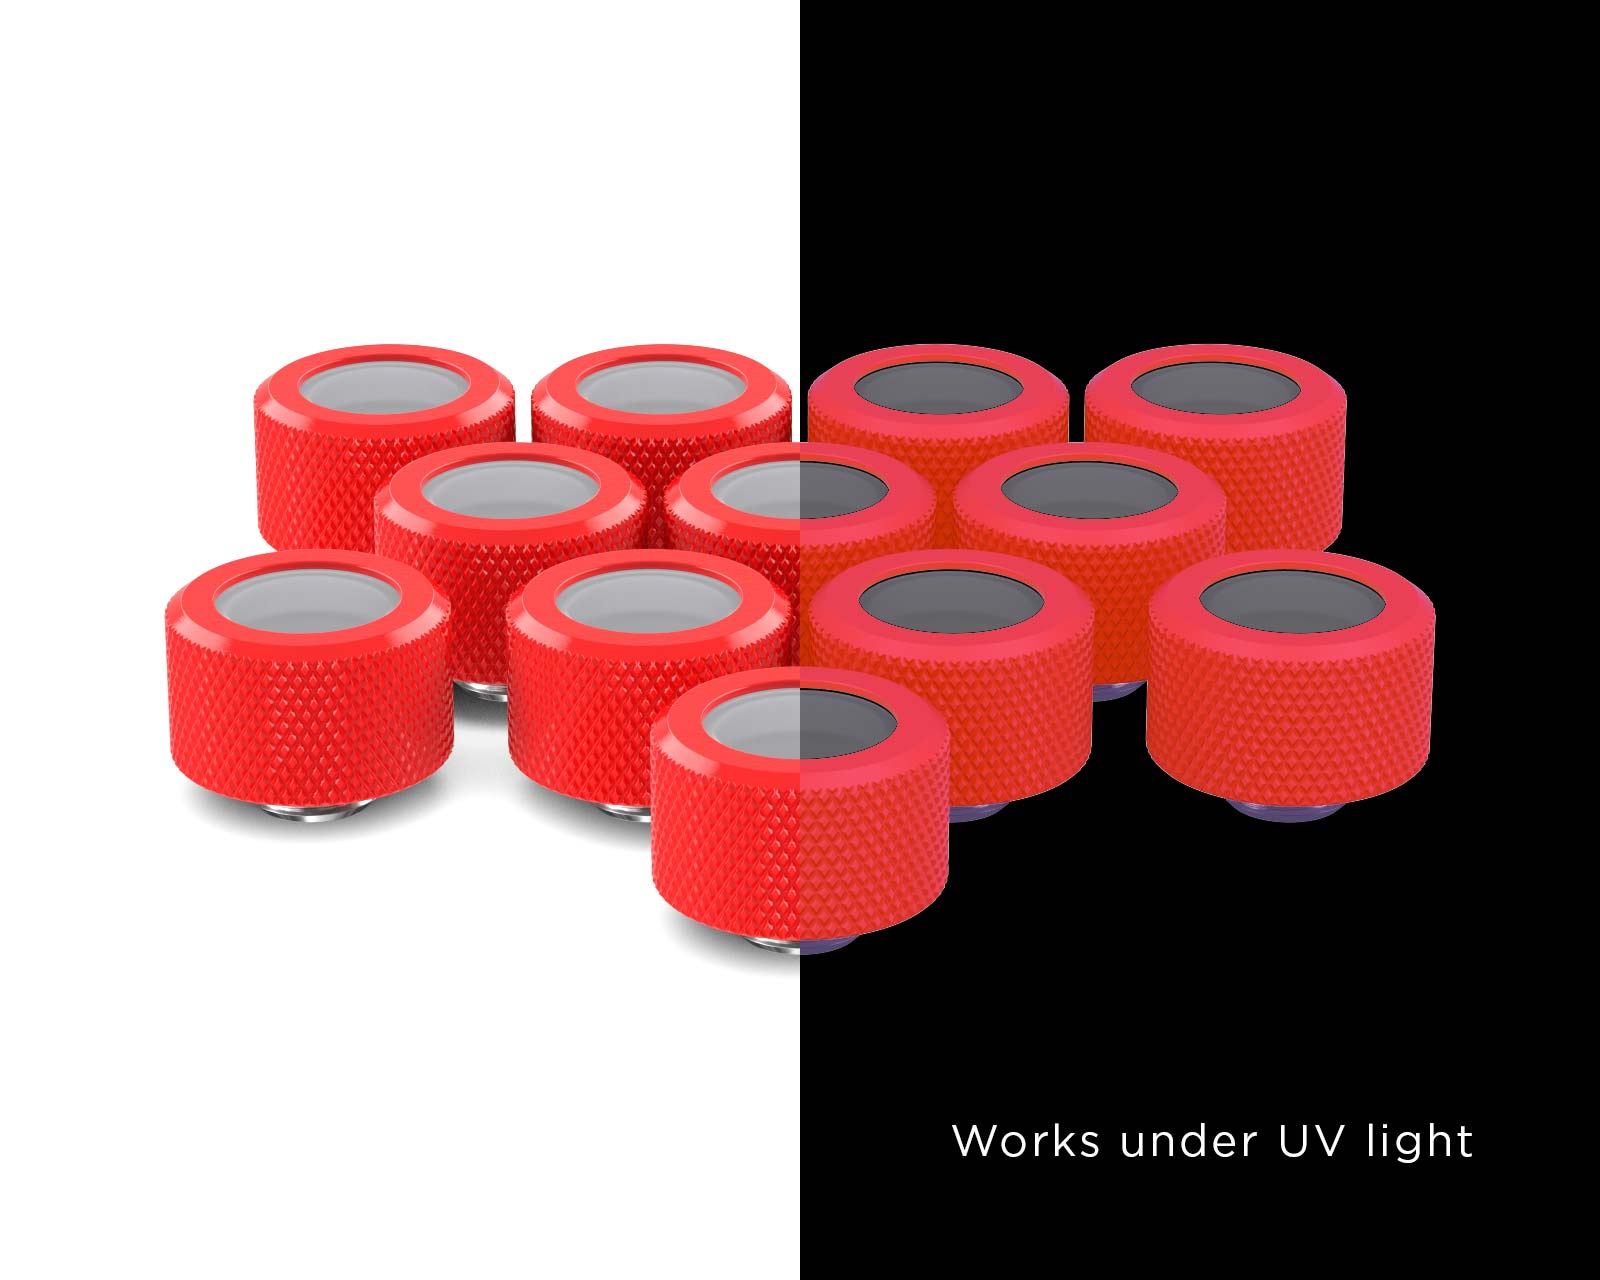 PrimoChill 16mm OD Rigid SX Fitting - 12 Pack - PrimoChill - KEEPING IT COOL UV Red